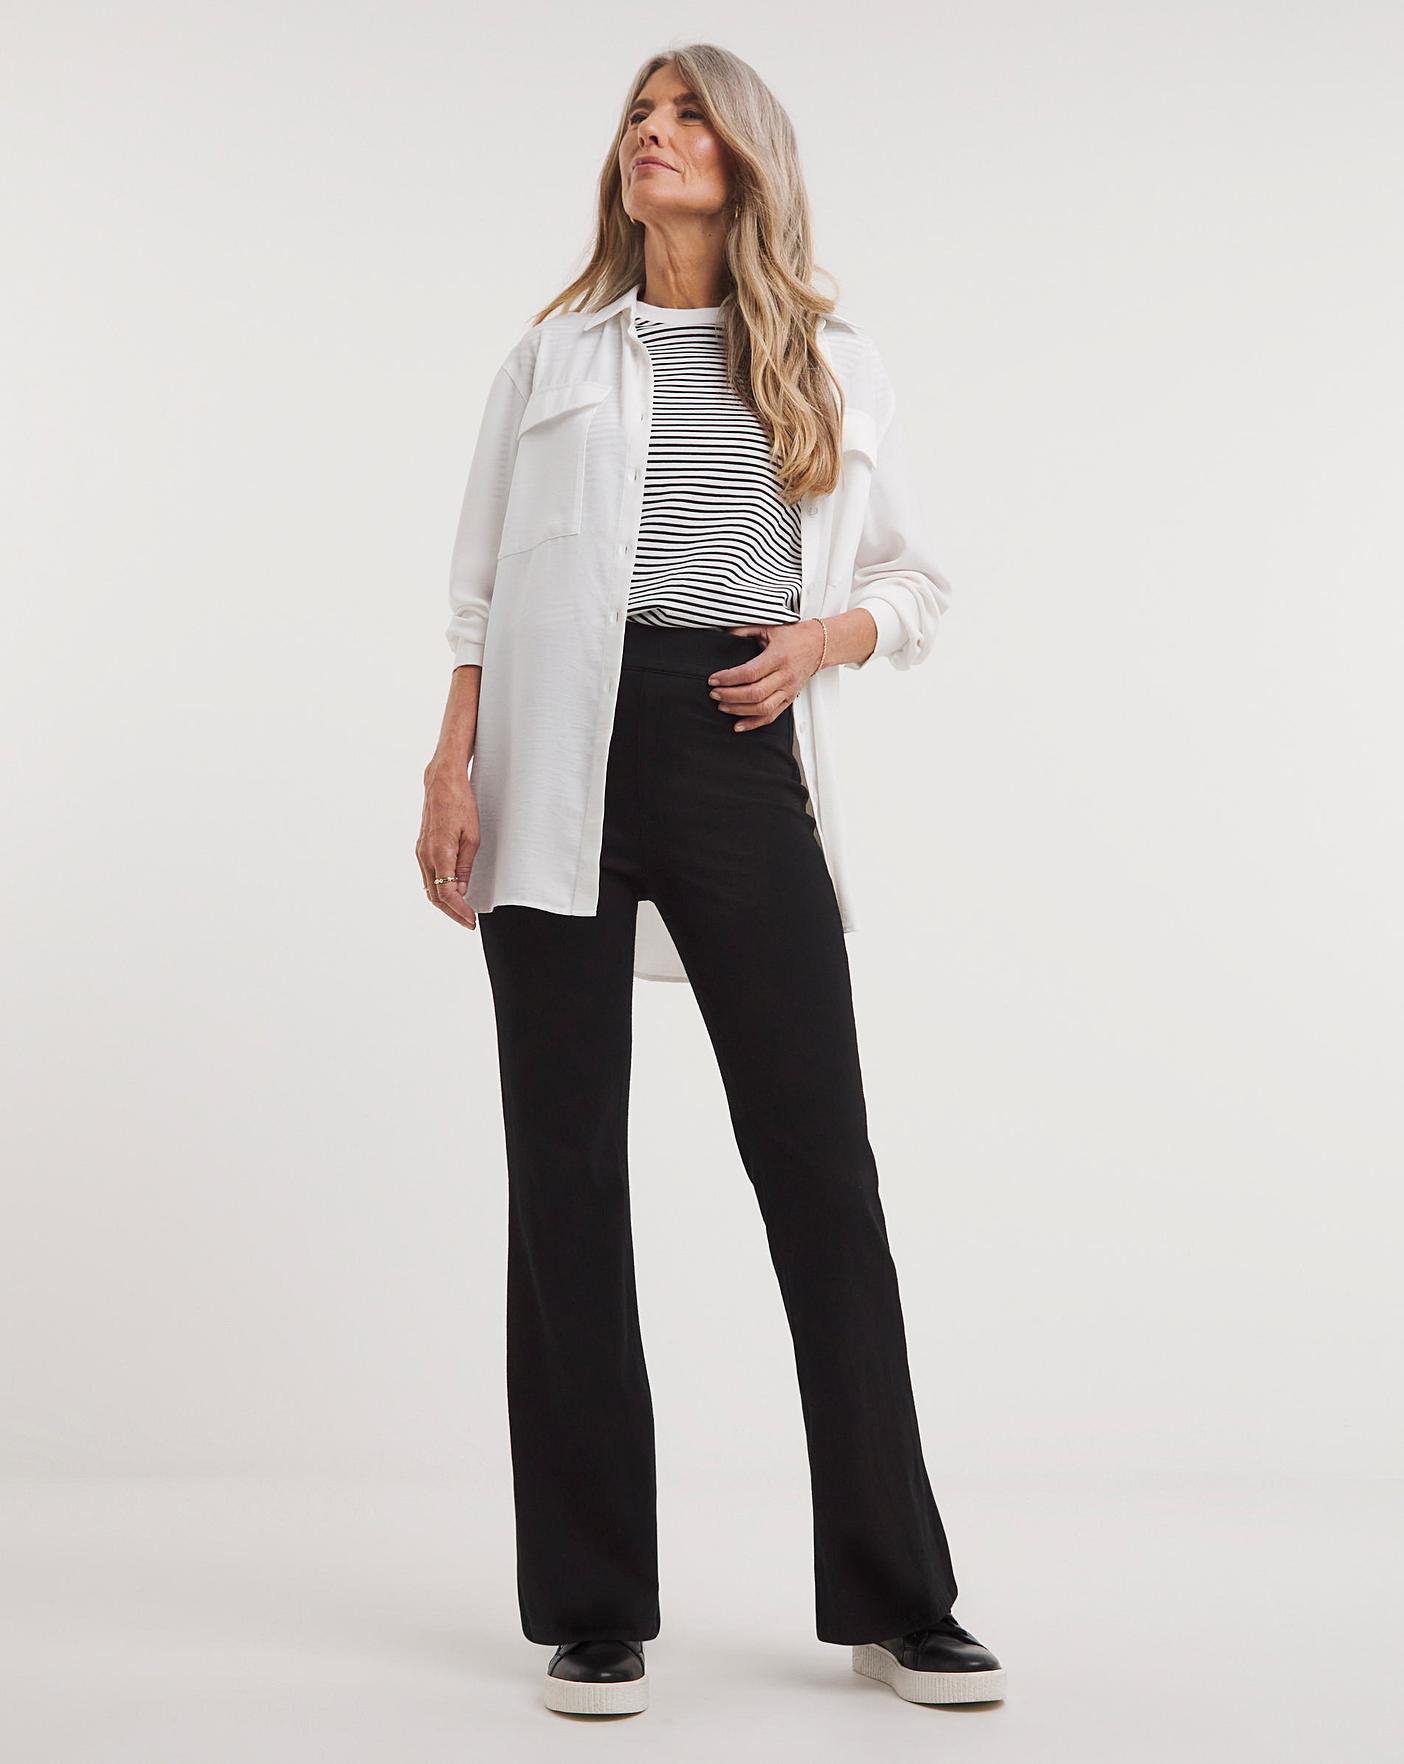 IMAN Global Chic Secret Smooth Pull-On Bootcut Pant - 20462221 | HSN